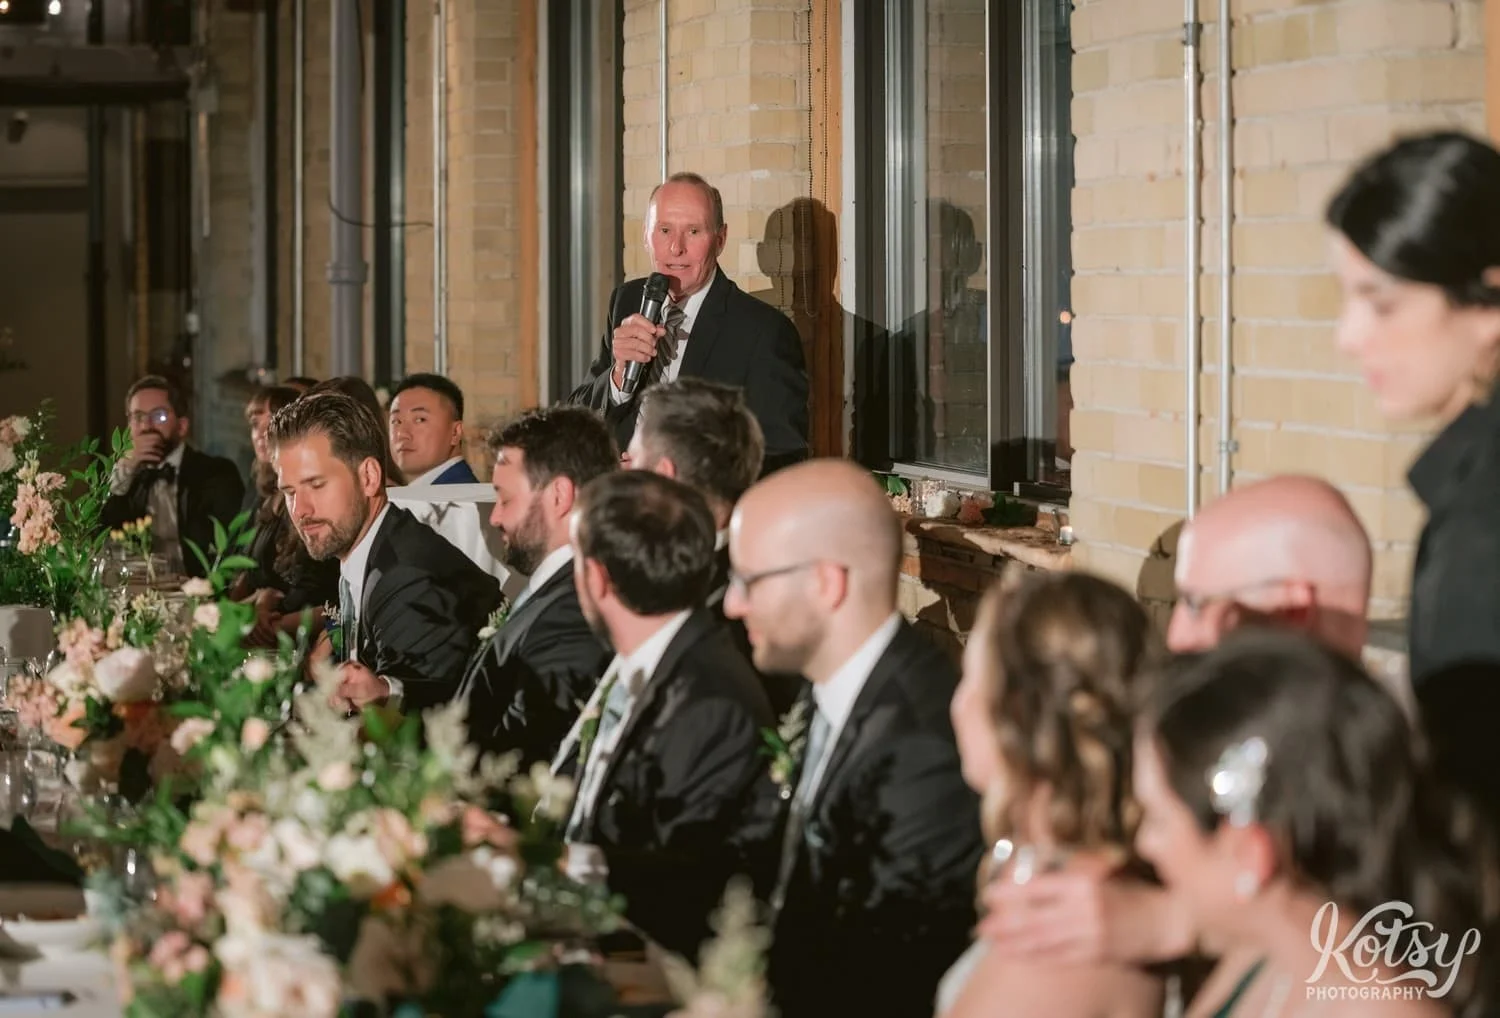 A man in a black suit holding a mic makes a speech to a room full of people during a Second Floor Events wedding reception in Toronto, Canada.